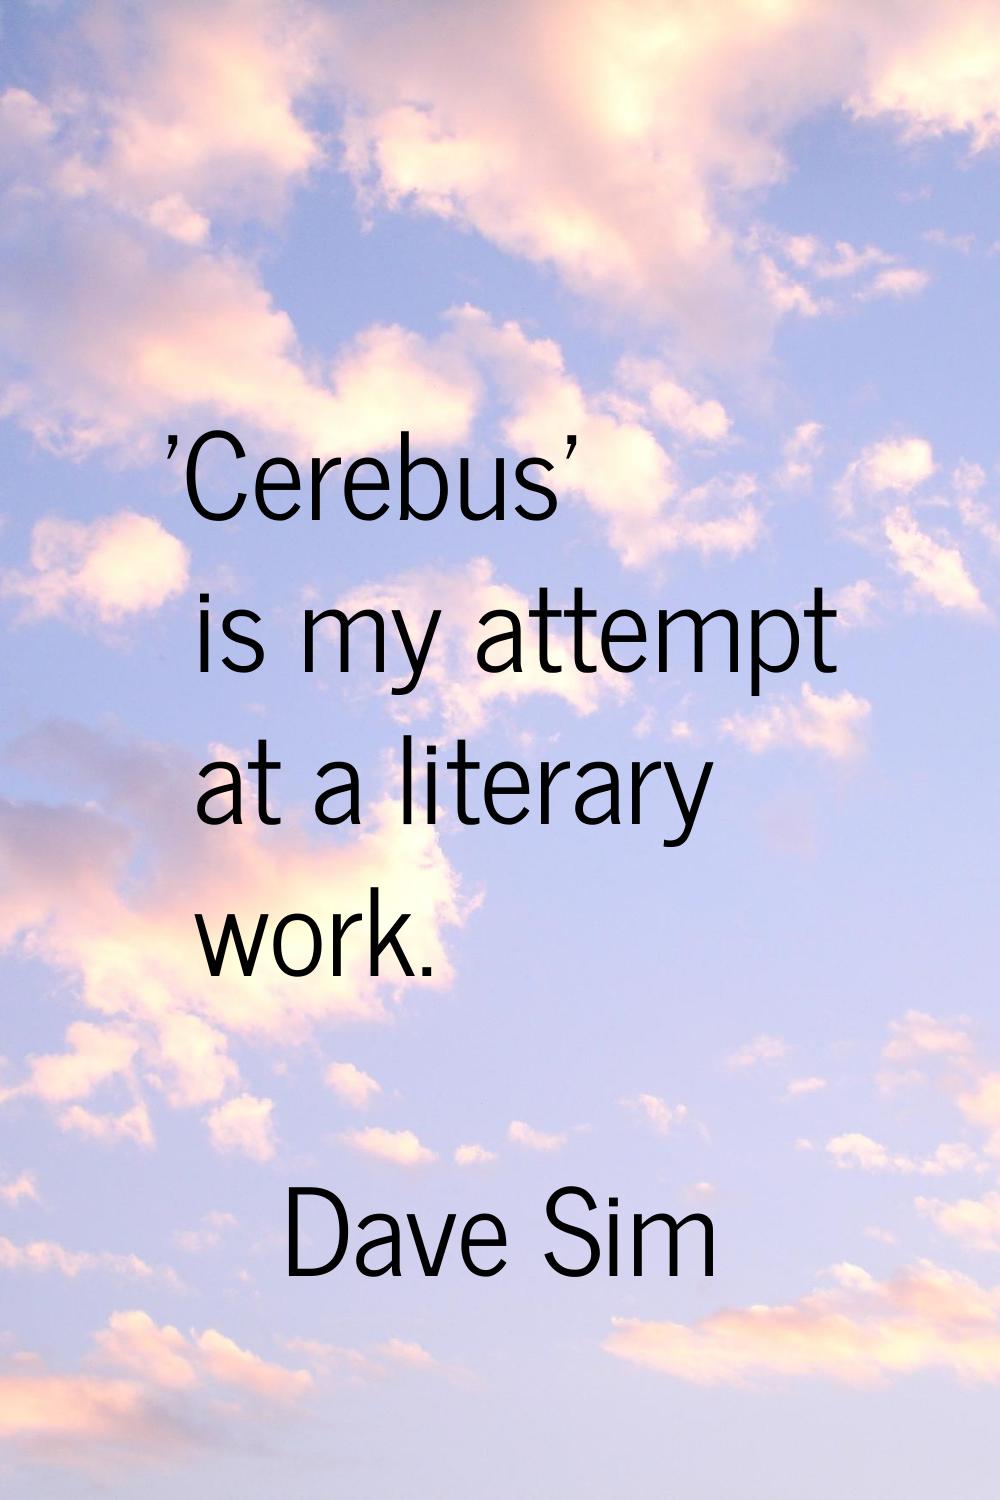 'Cerebus' is my attempt at a literary work.